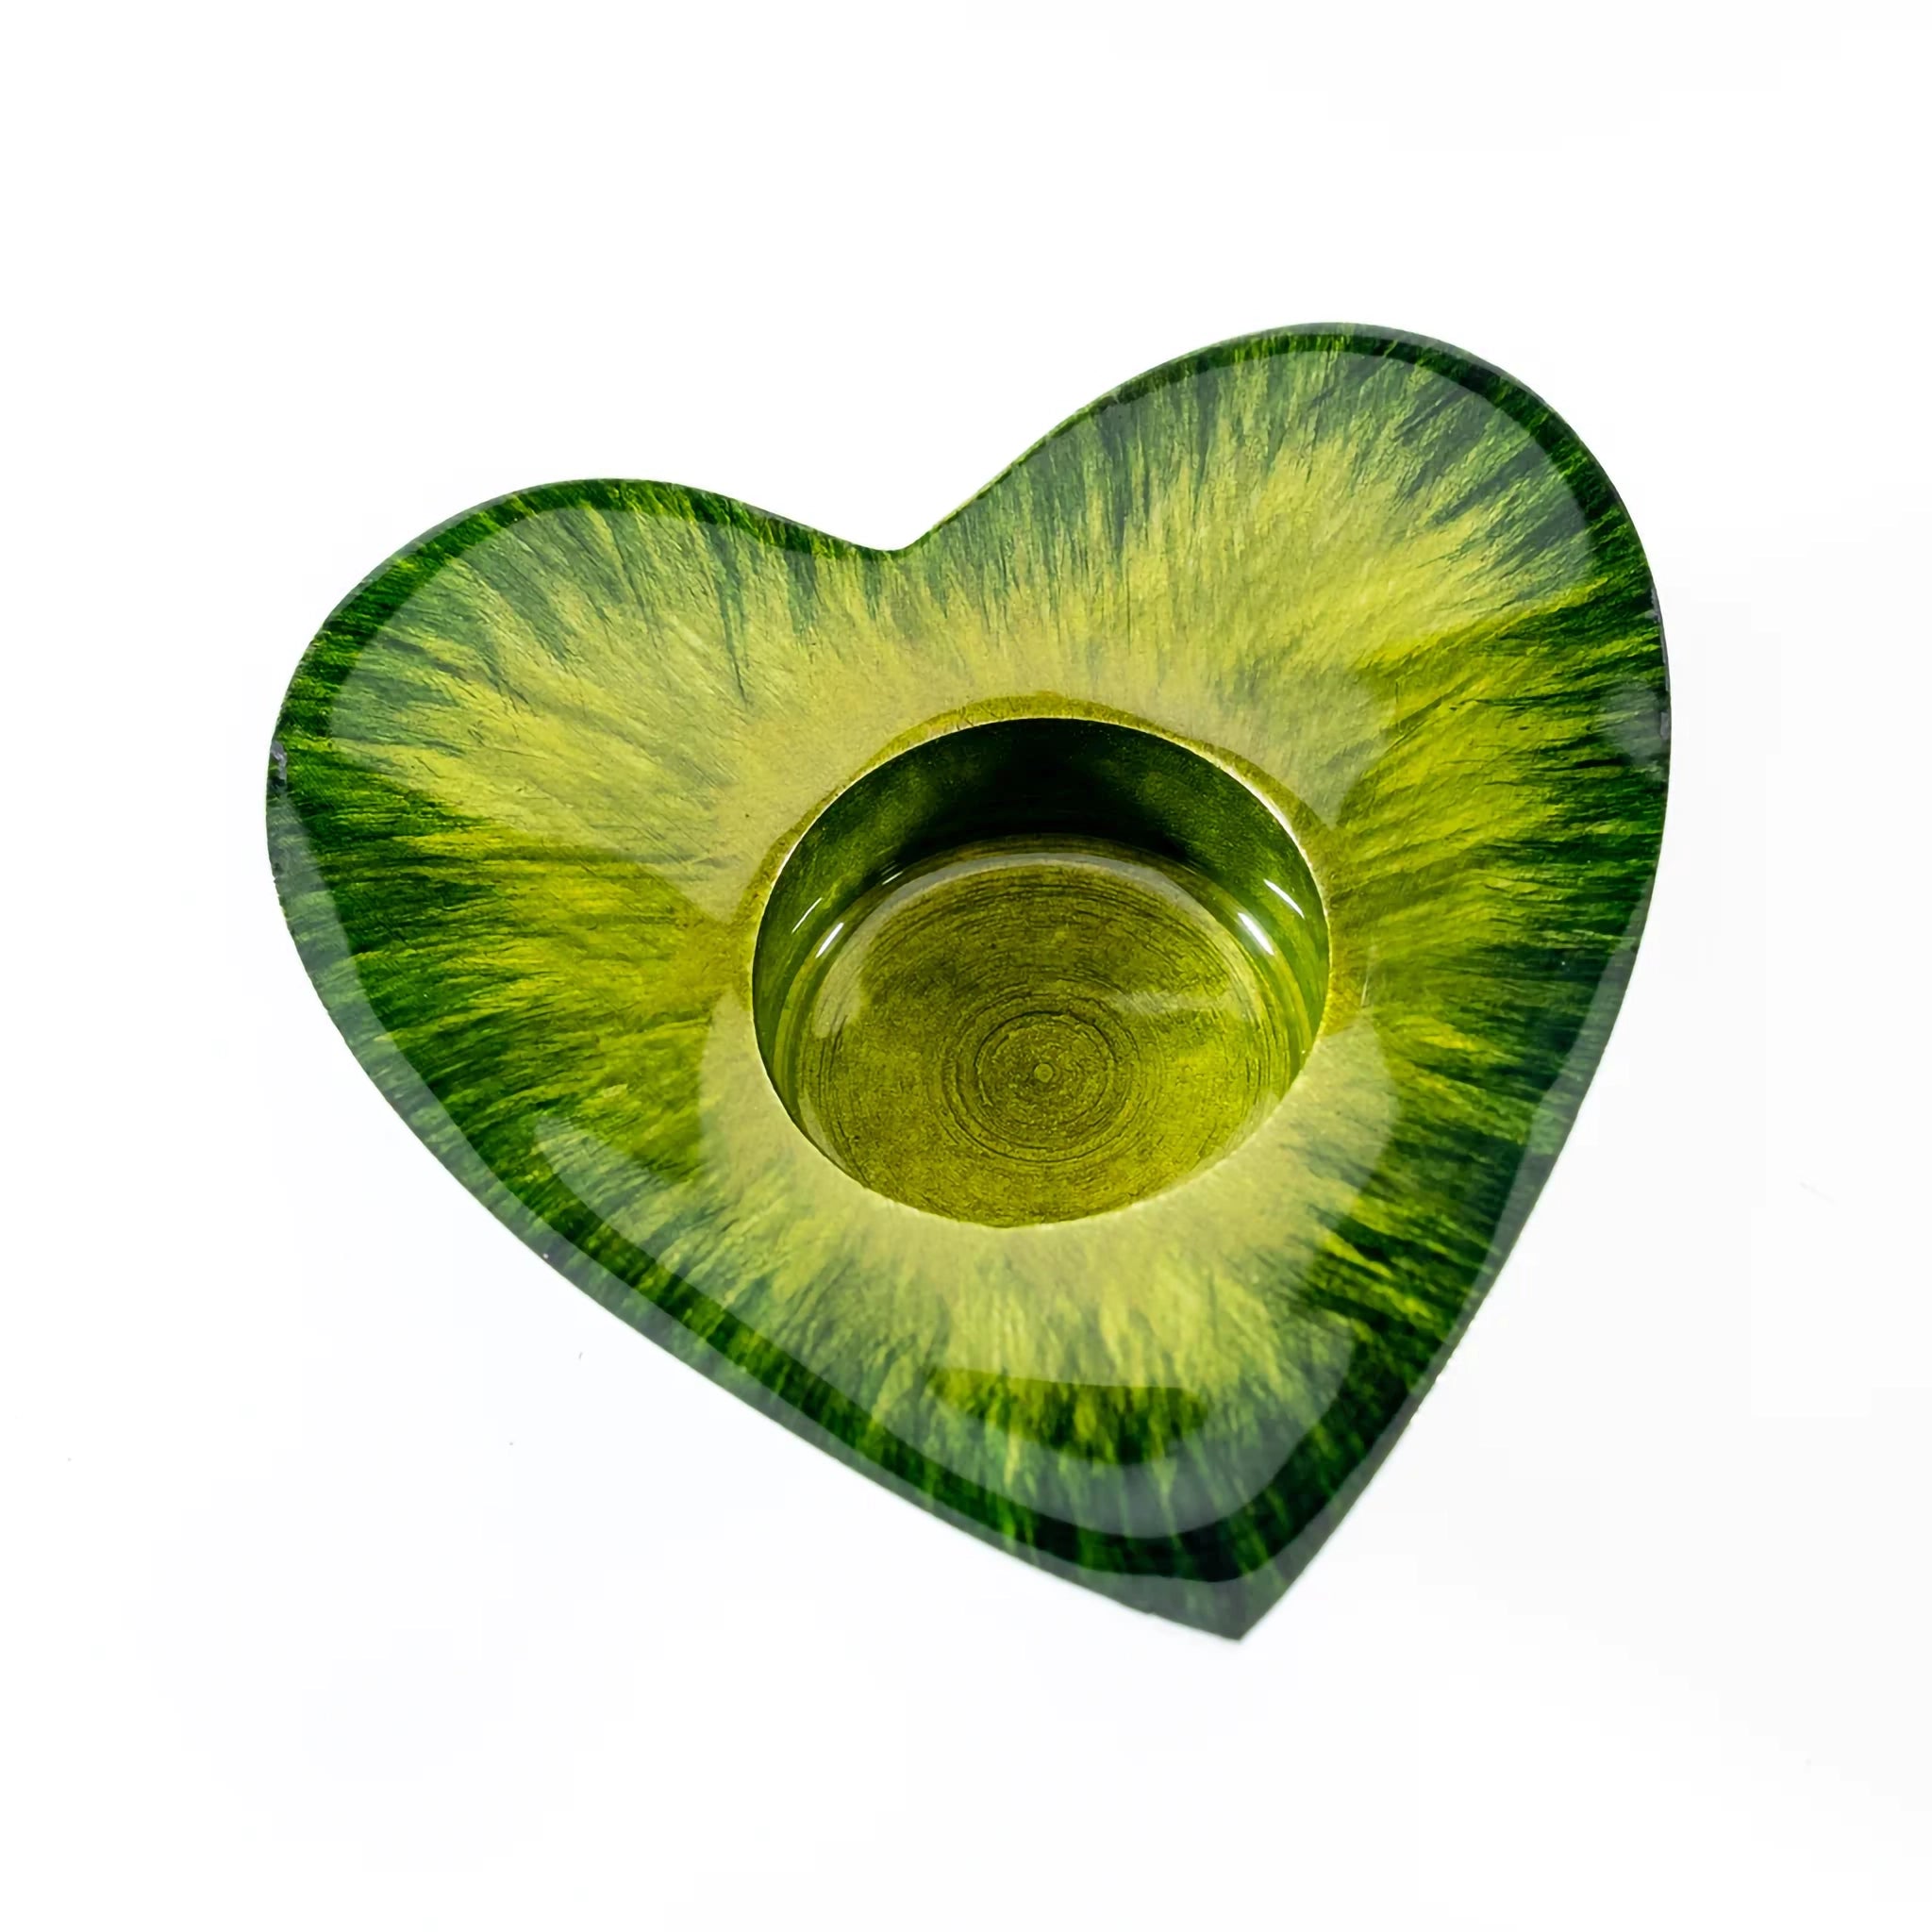 A green enamel decorated heart shaped t-light holder